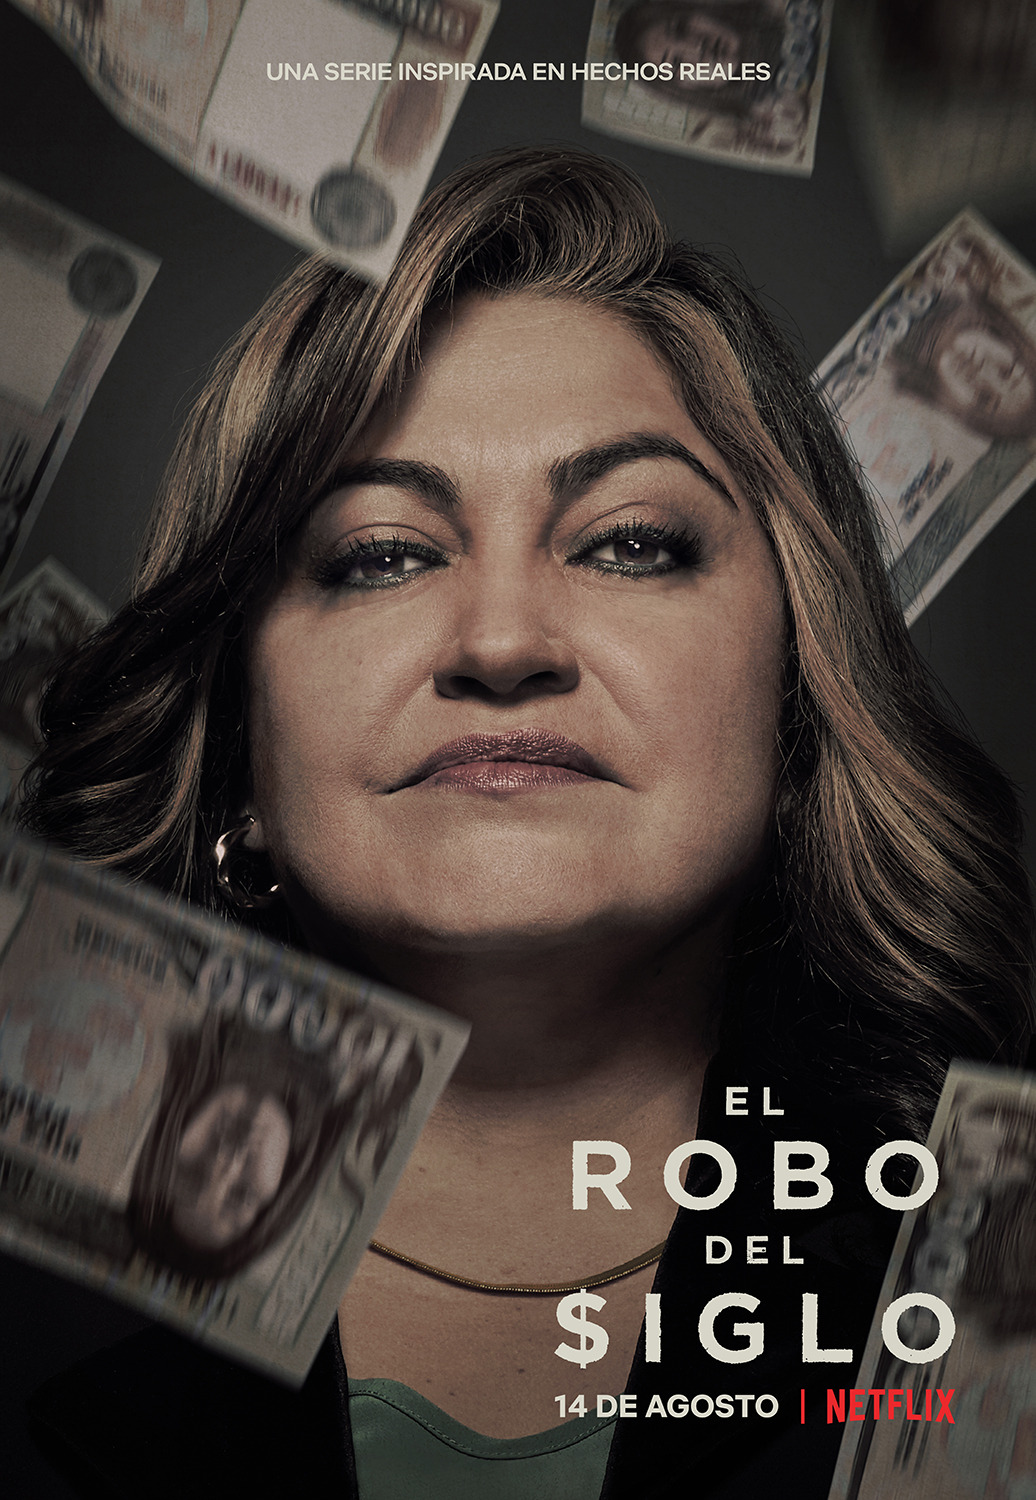 Extra Large TV Poster Image for El robo del siglo (#2 of 4)